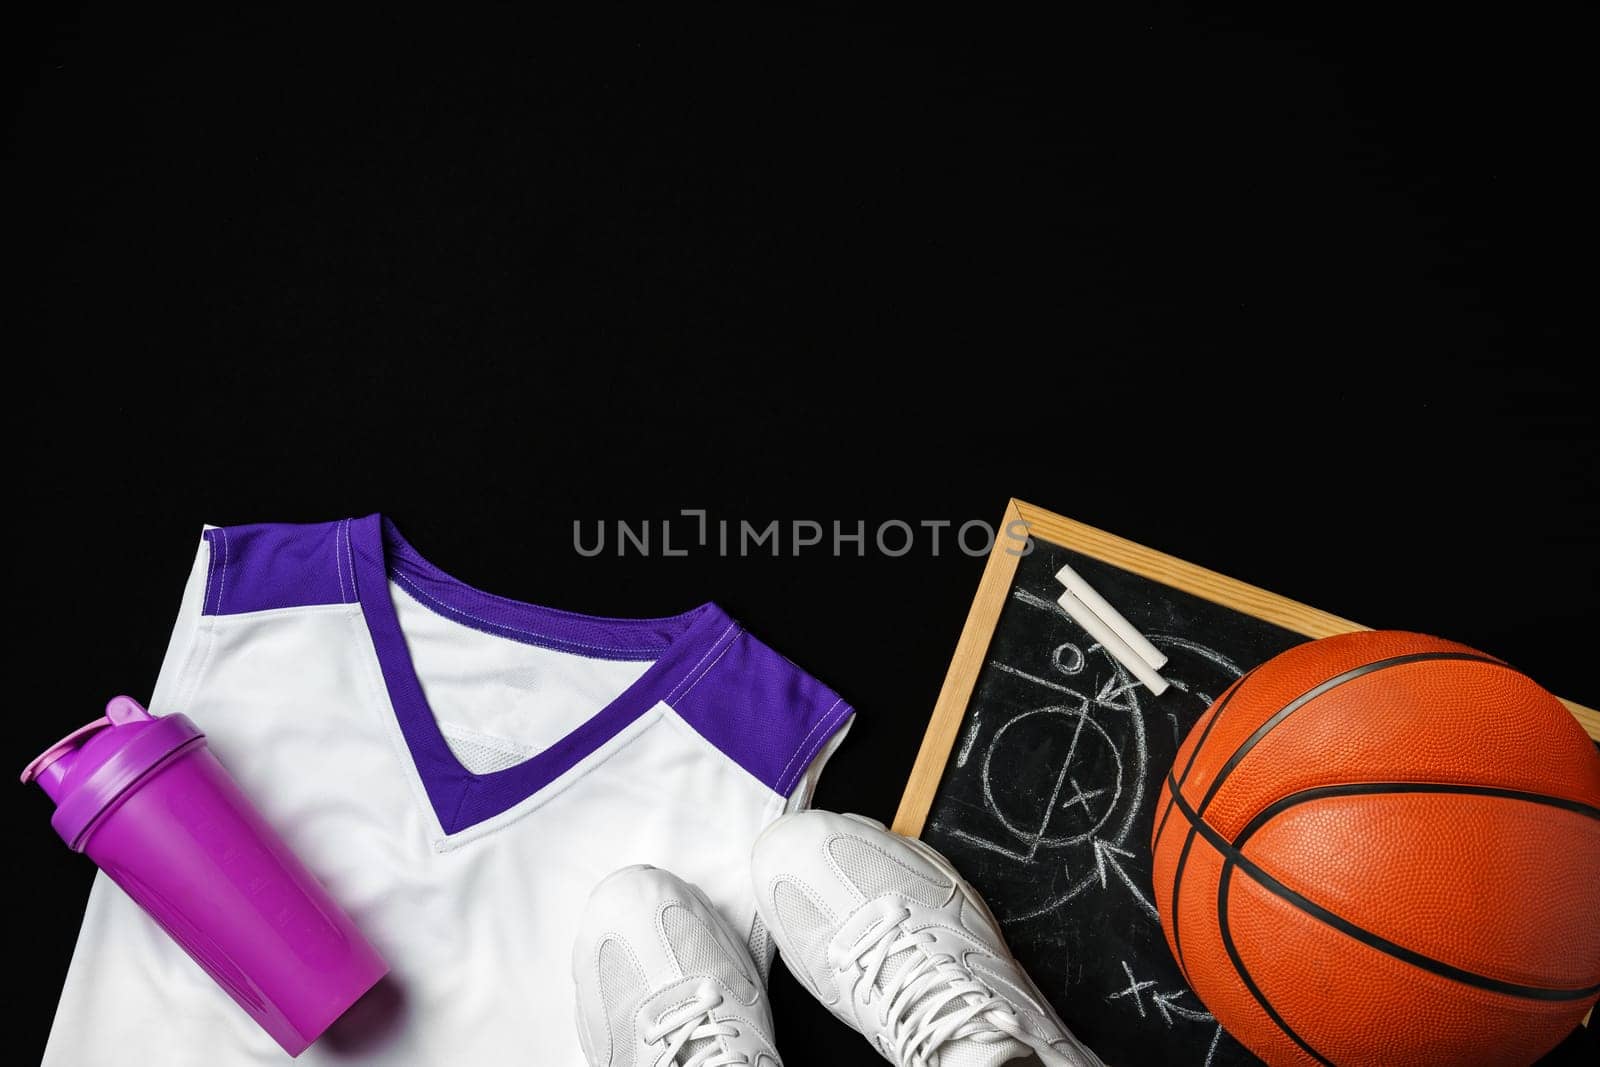 Basketball Gear Including Sneakers, Ball, and Play Strategy Board on Black Background by Fabrikasimf